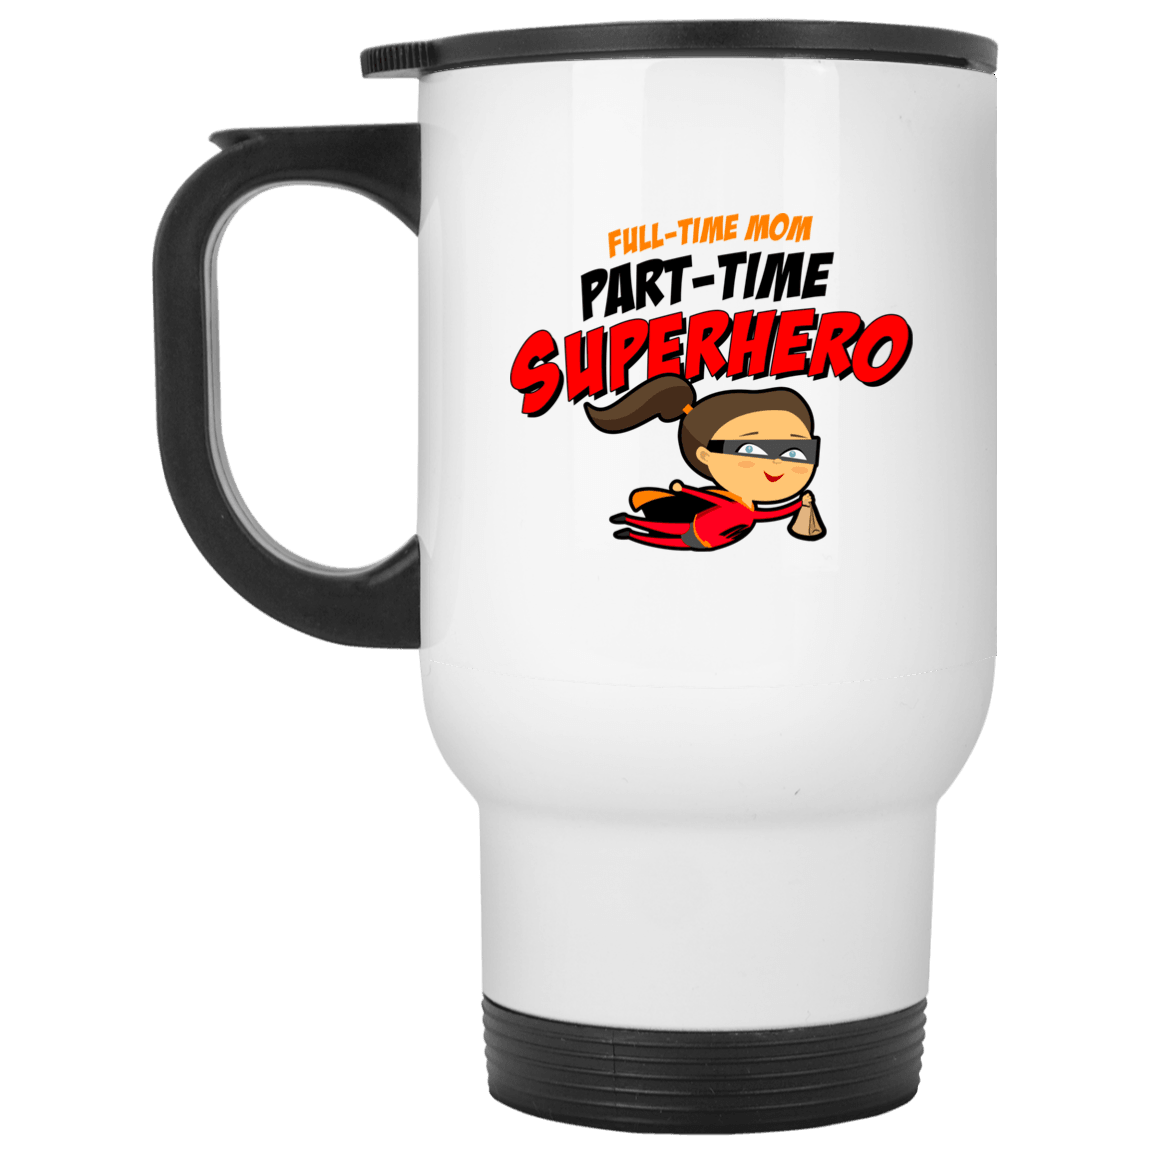 Designs by MyUtopia Shout Out:Full-time Mom Part-Time Superhero 14 oz Stainless Steel Travel Coffee Mug w. Twist Close Lid,White / One Size,Travel Mug